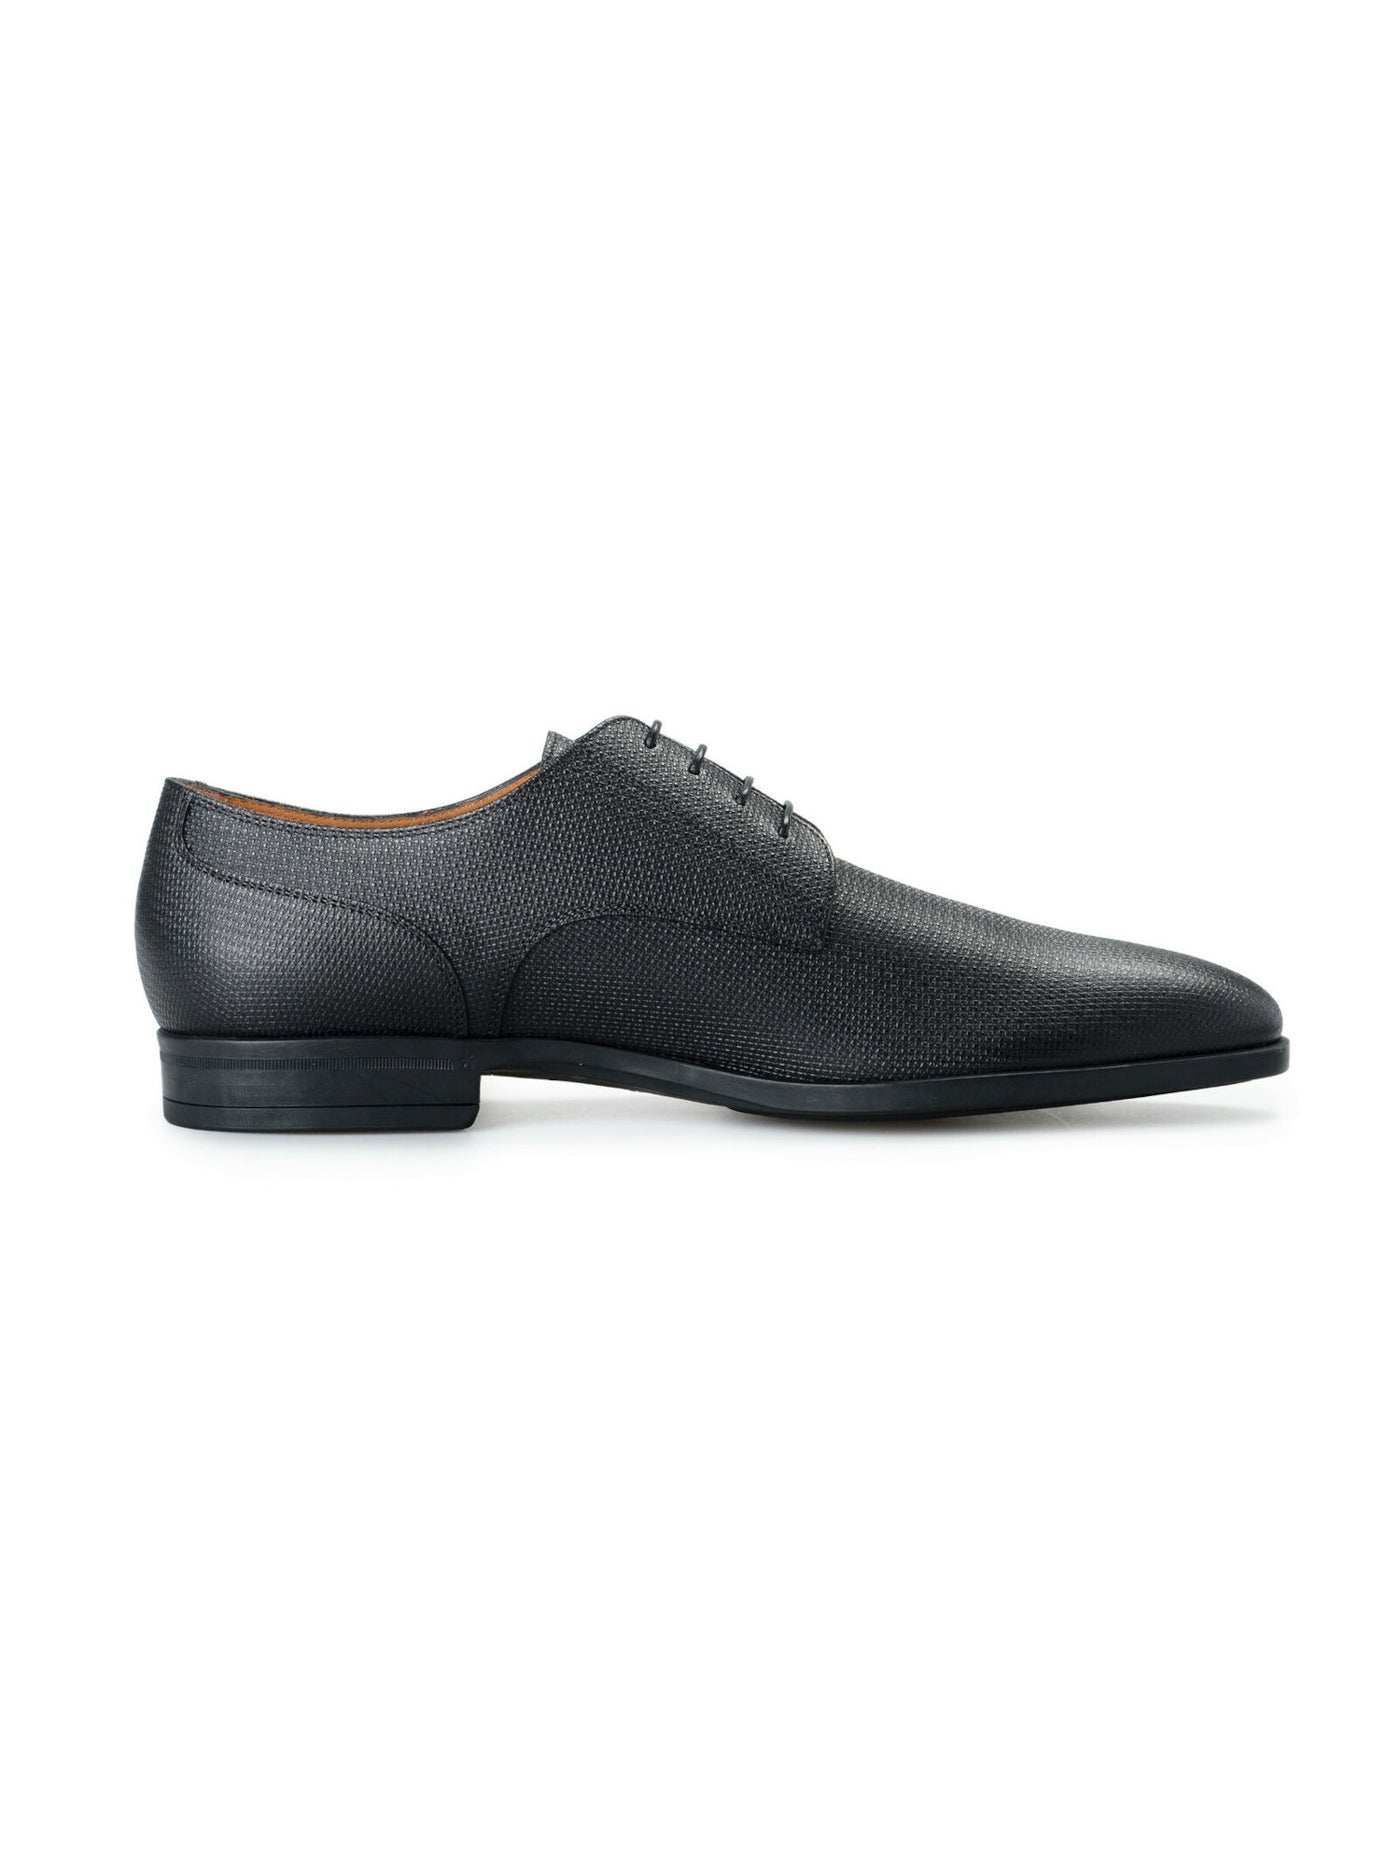 BOSS Mens Black Embossed Derby Padded Portland Square Toe Block Heel Lace-Up Leather Dress Flats 9